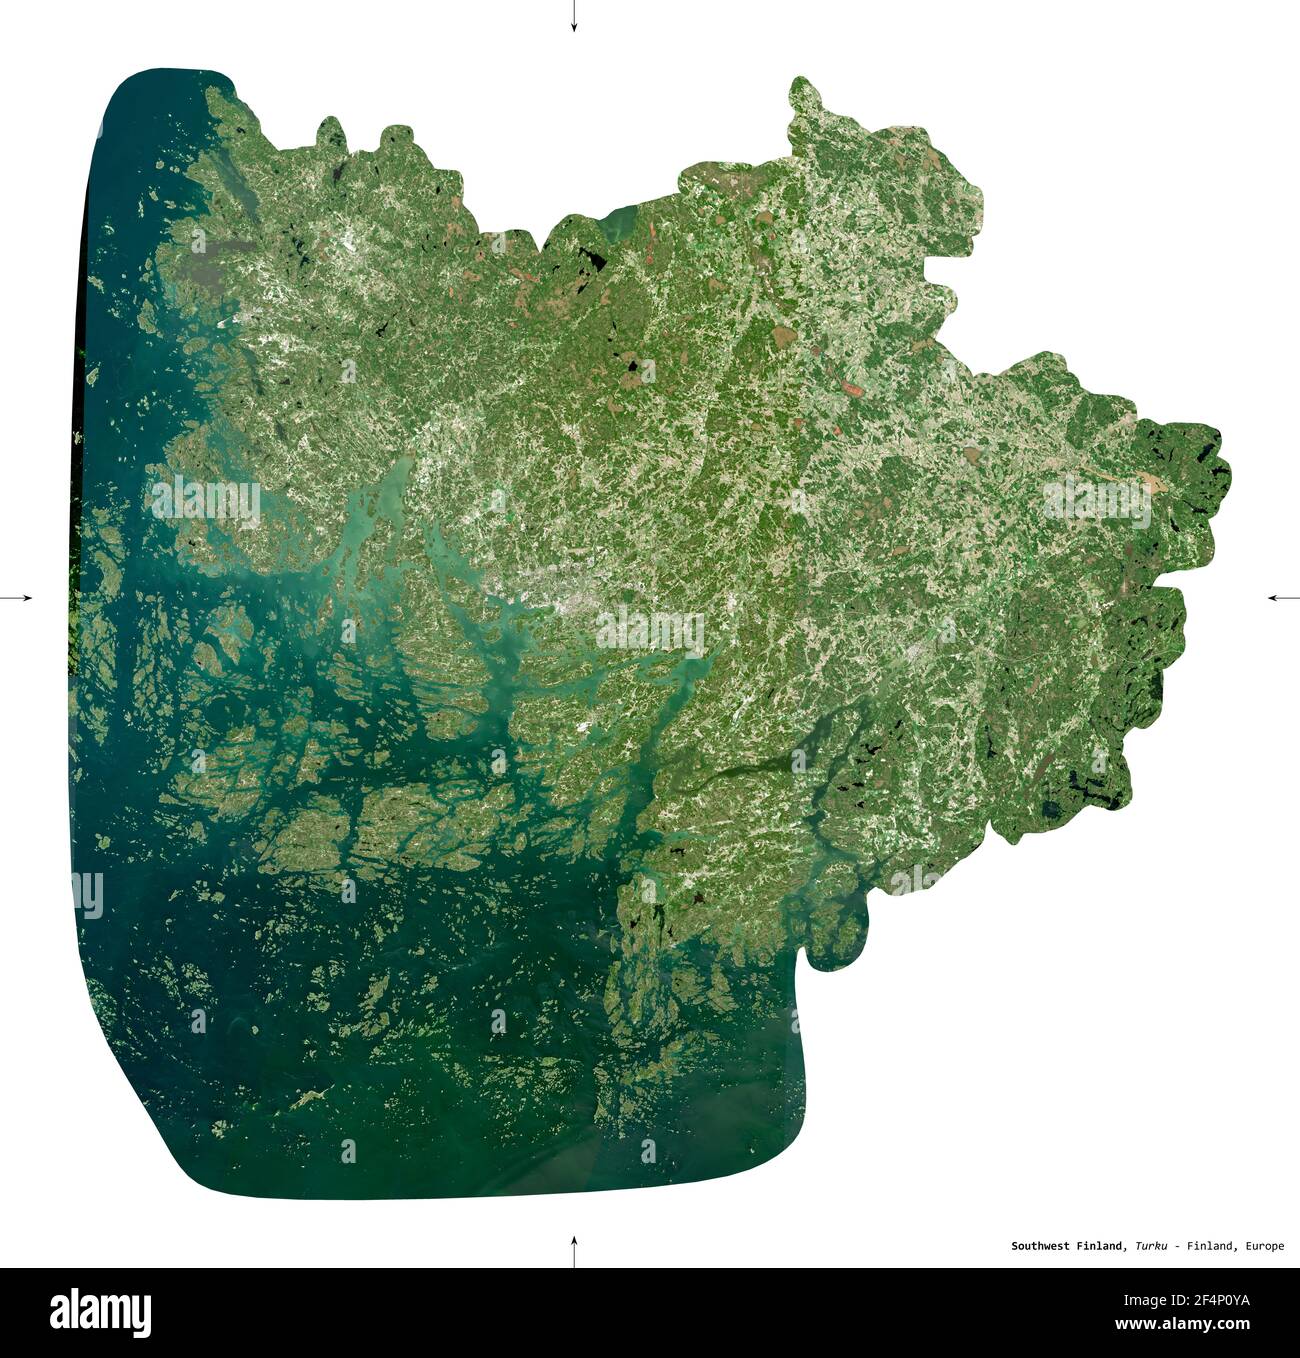 Southwest Finland, region of Finland. Sentinel-2 satellite imagery. Shape isolated on white. Description, location of the capital. Contains modified C Stock Photo